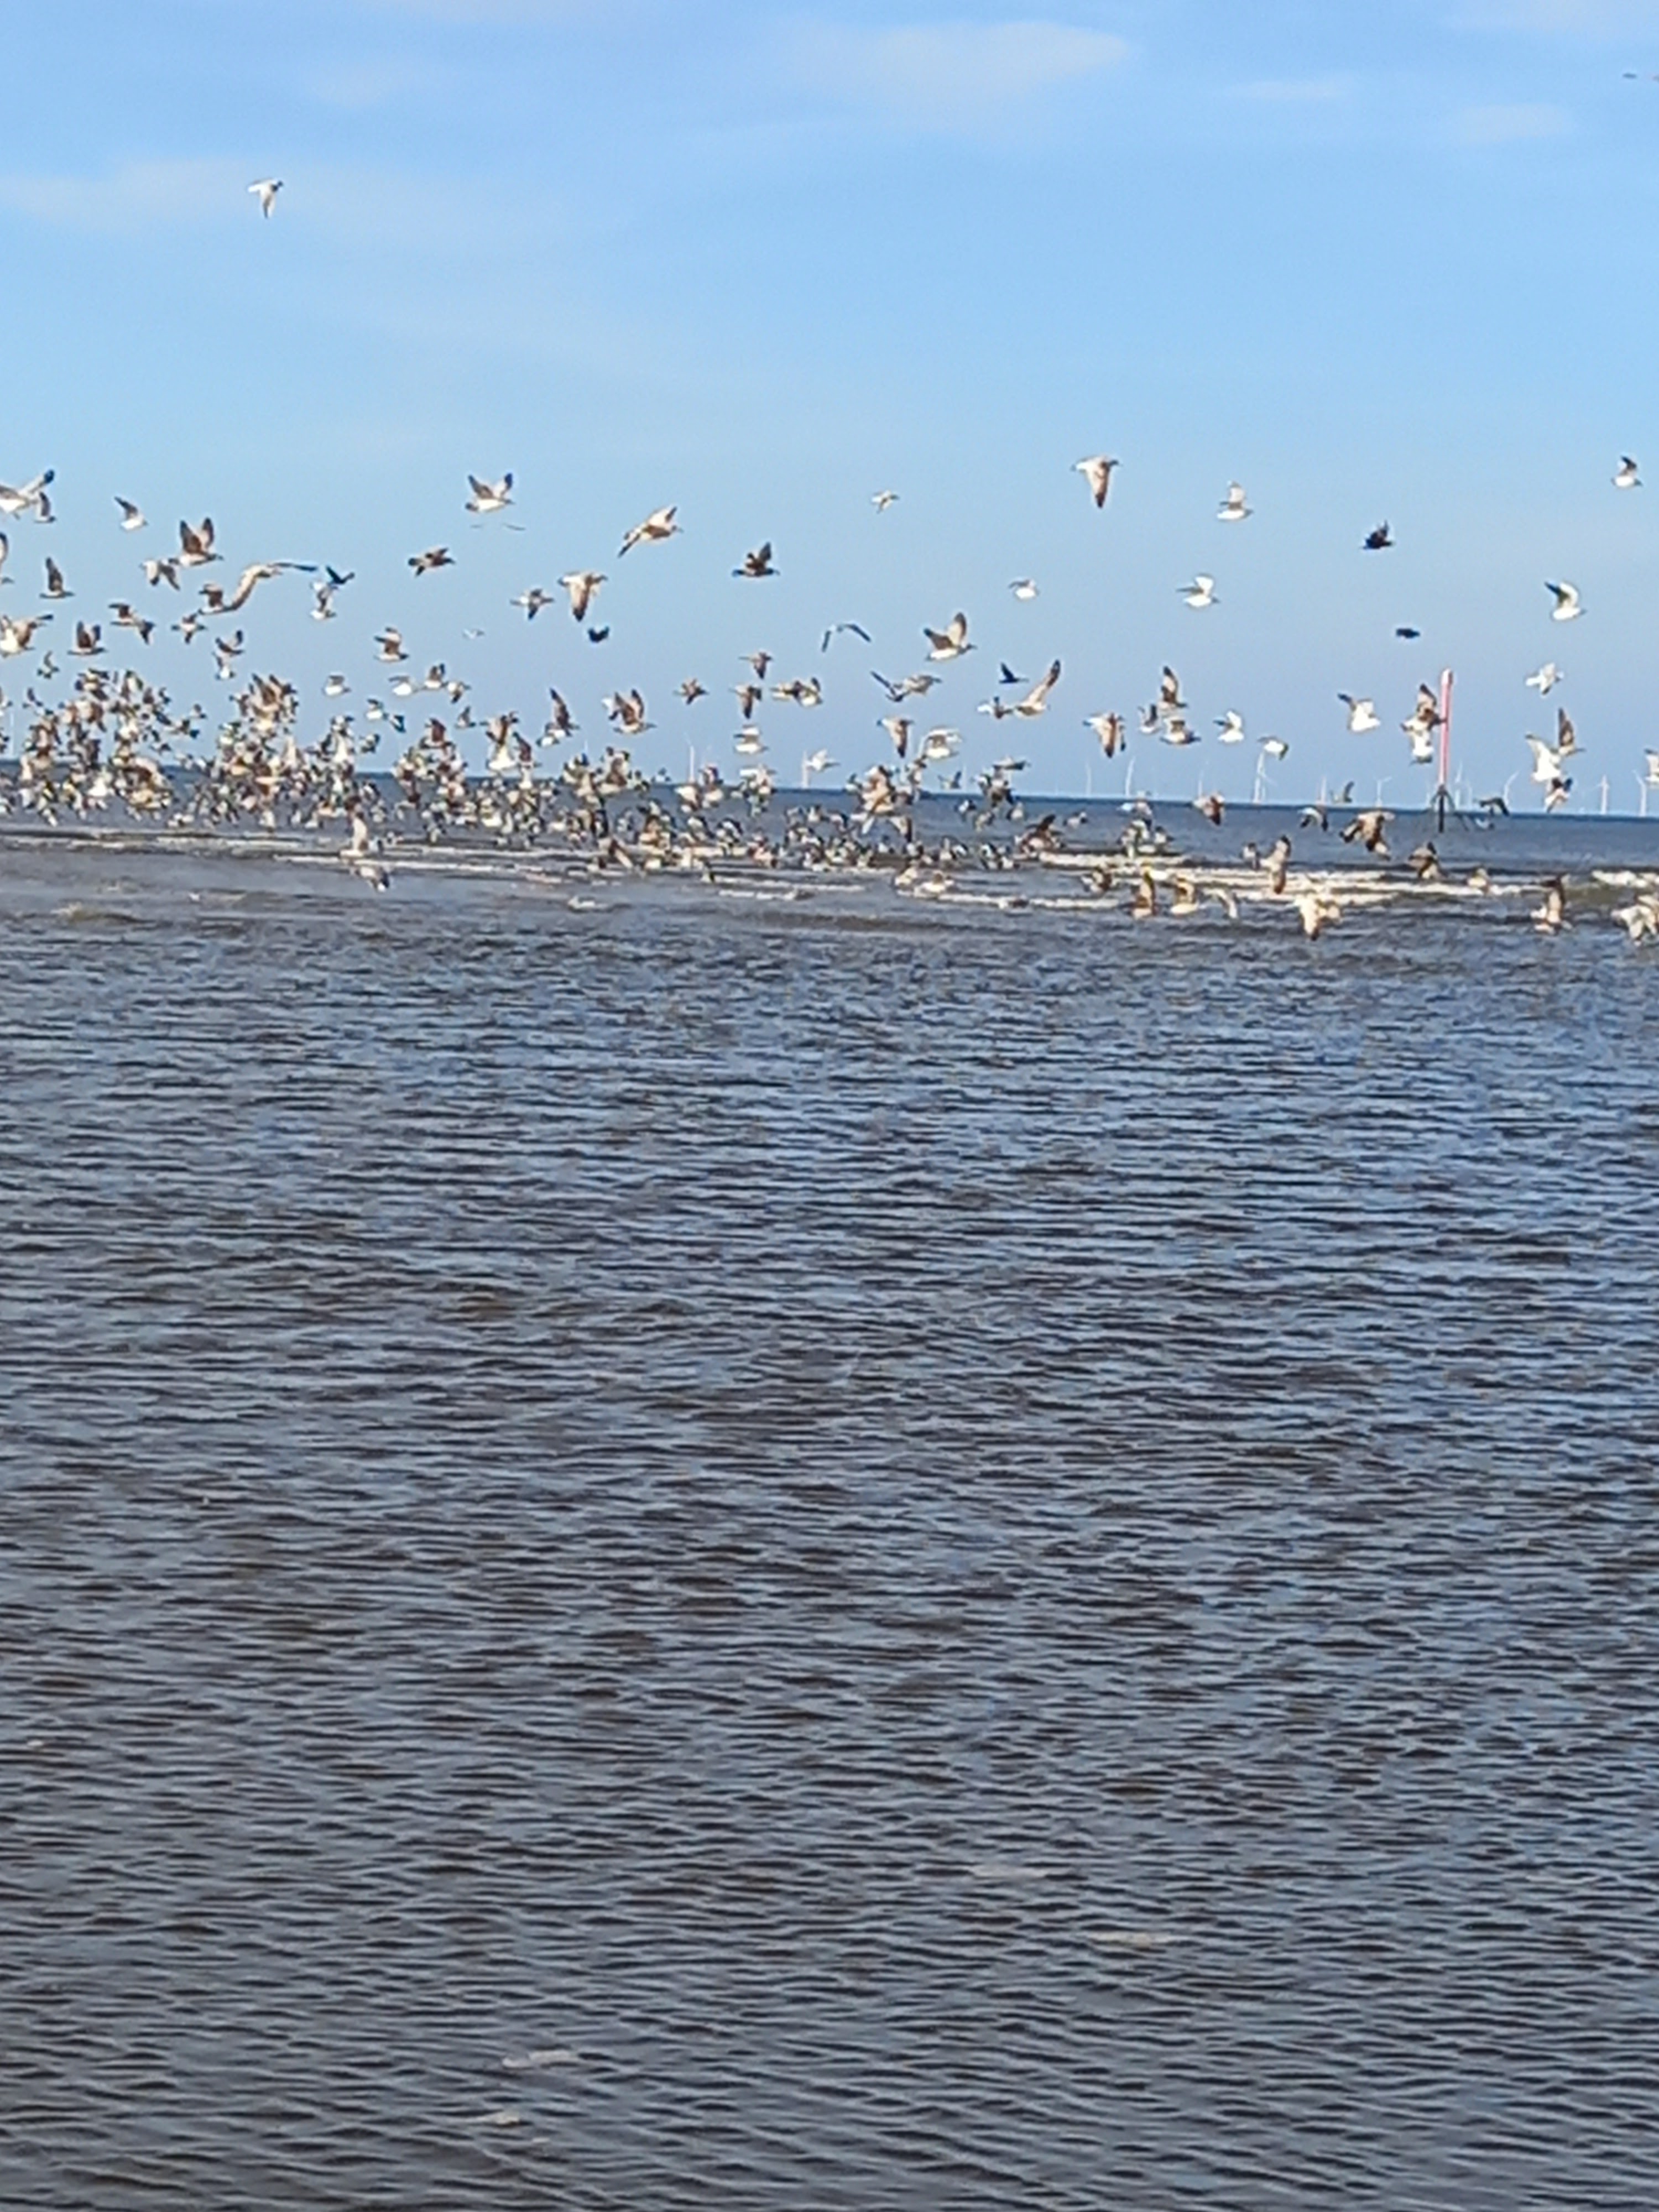 Sea birds that were calmly feeding on a sandbank flying off as they submit to the incoming tide. Taken by Diane Woodrow